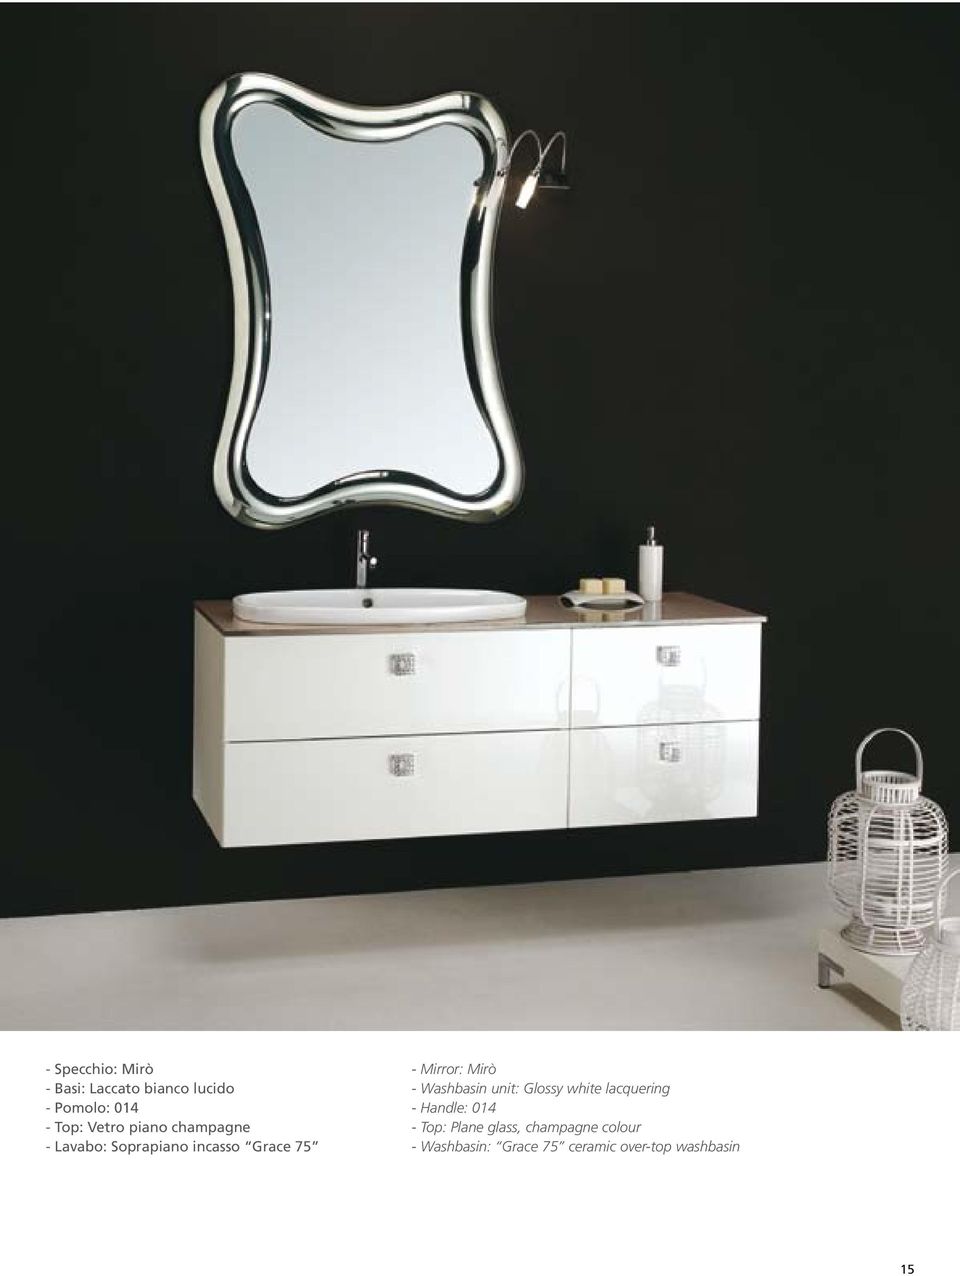 Mirò - Washbasin unit: Glossy white lacquering - Handle: 014 - Top: